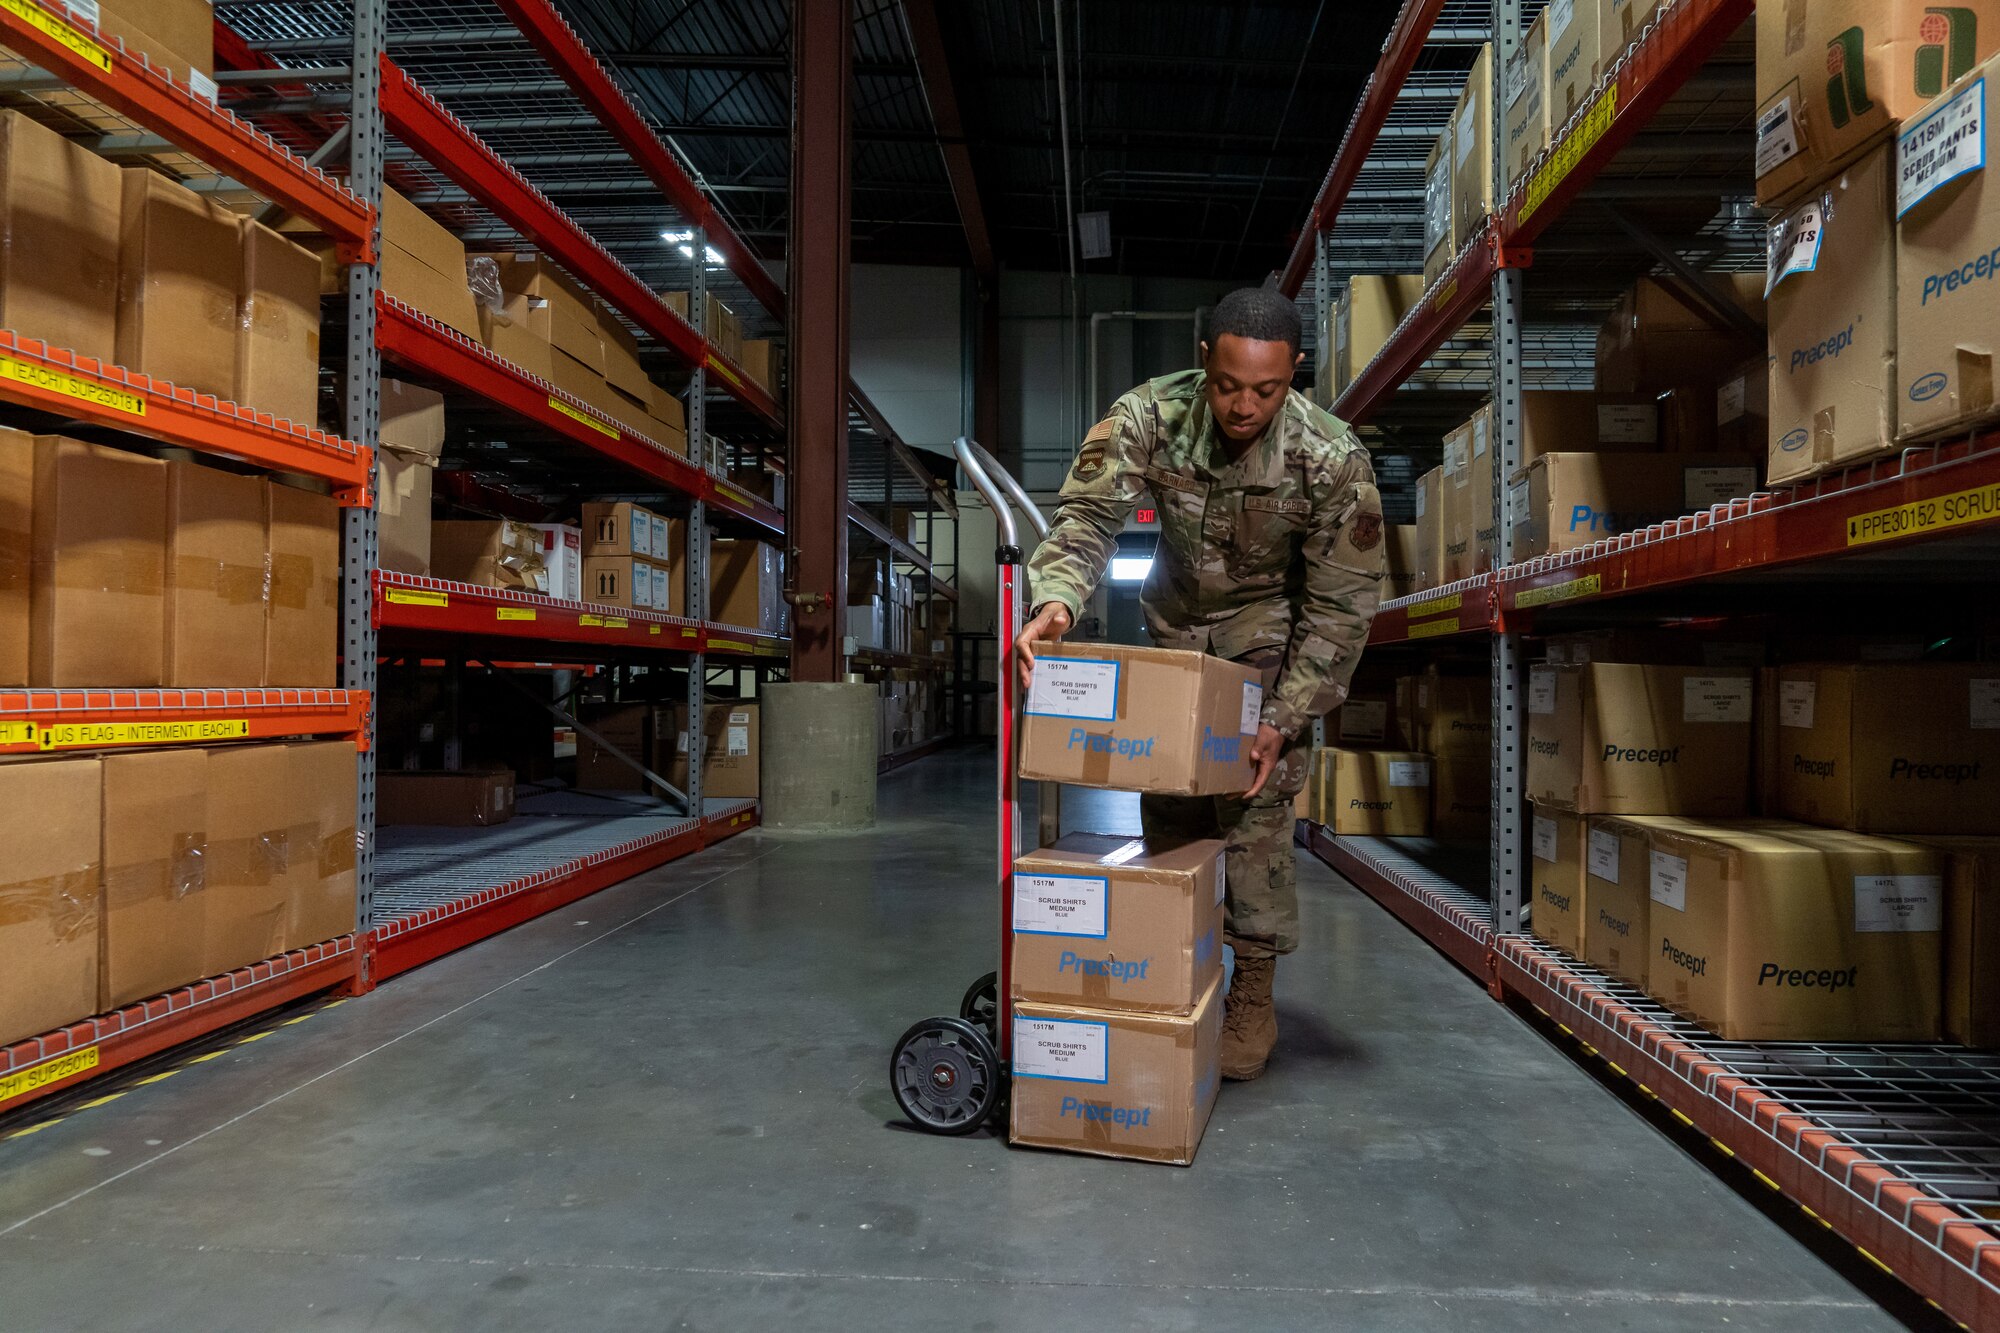 Senior Airman Osborne Barnard, Air Force Mortuary Affairs Operations departures specialist, assists with receiving logistical supplies in the AFMAO warehouse at Dover Air Force Base, Delaware, April 21, 2022. Barnard is a reservist deployed to AFMAO from the 512th Memorial Affairs Squadron. (U.S. Air Force photo by Jason Minto)